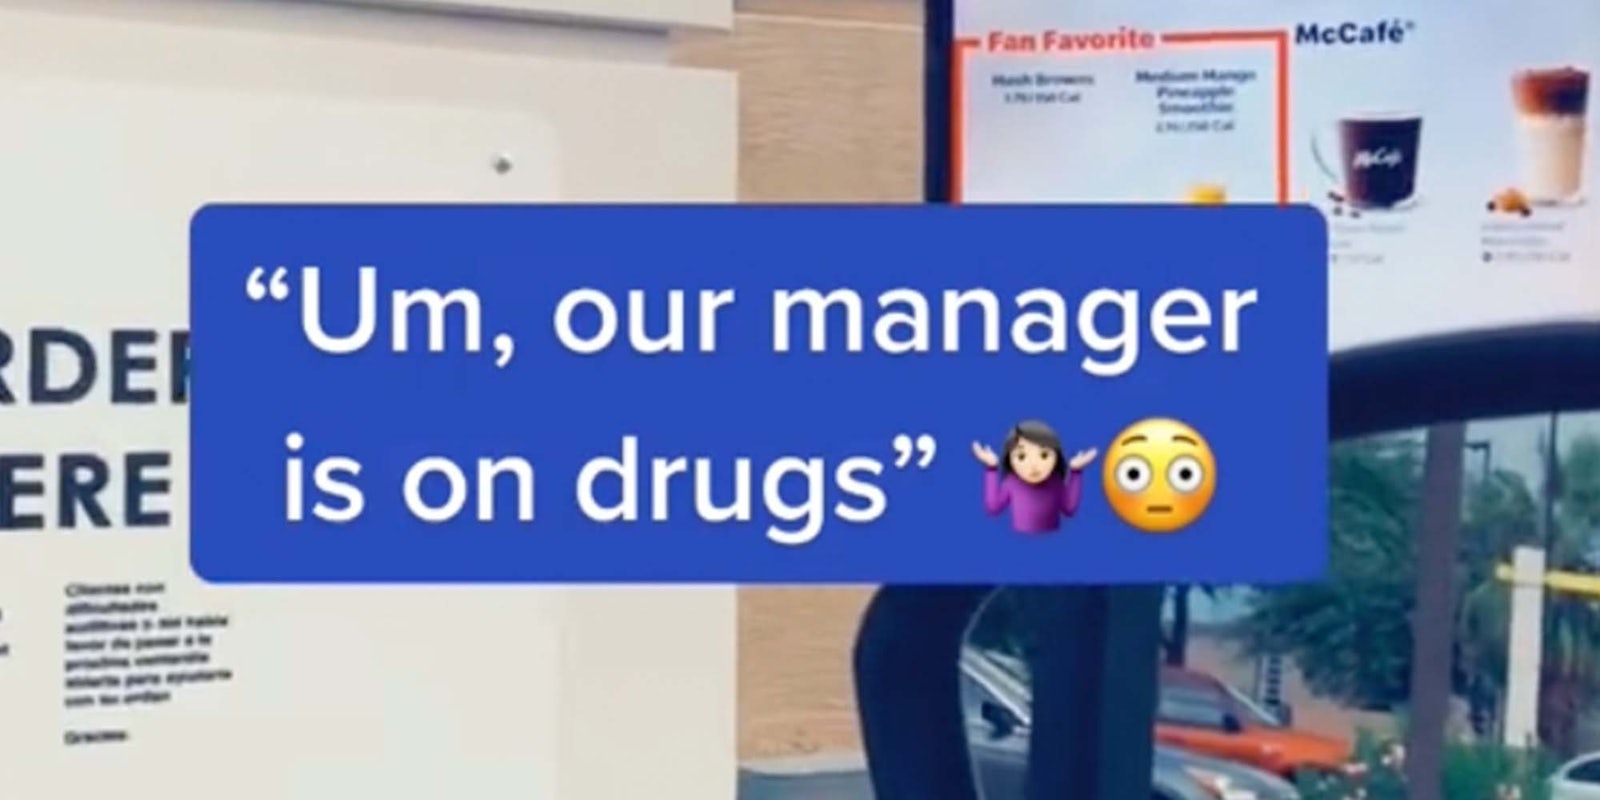 In a TikTok, a McDonald's worker tells a customer that their manager is on drugs.